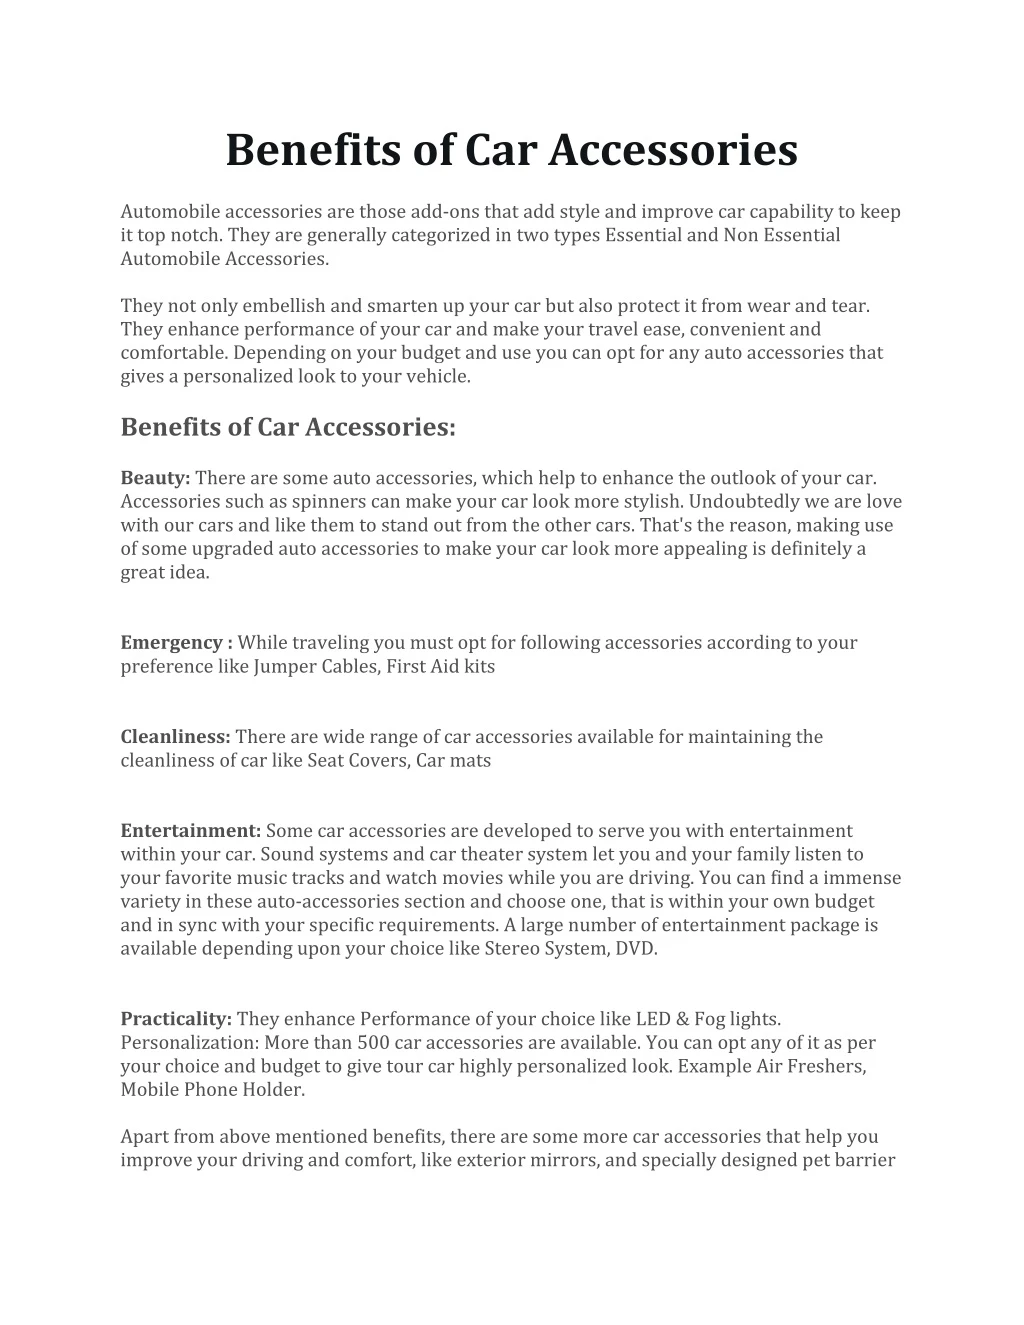 benefits of car accessories